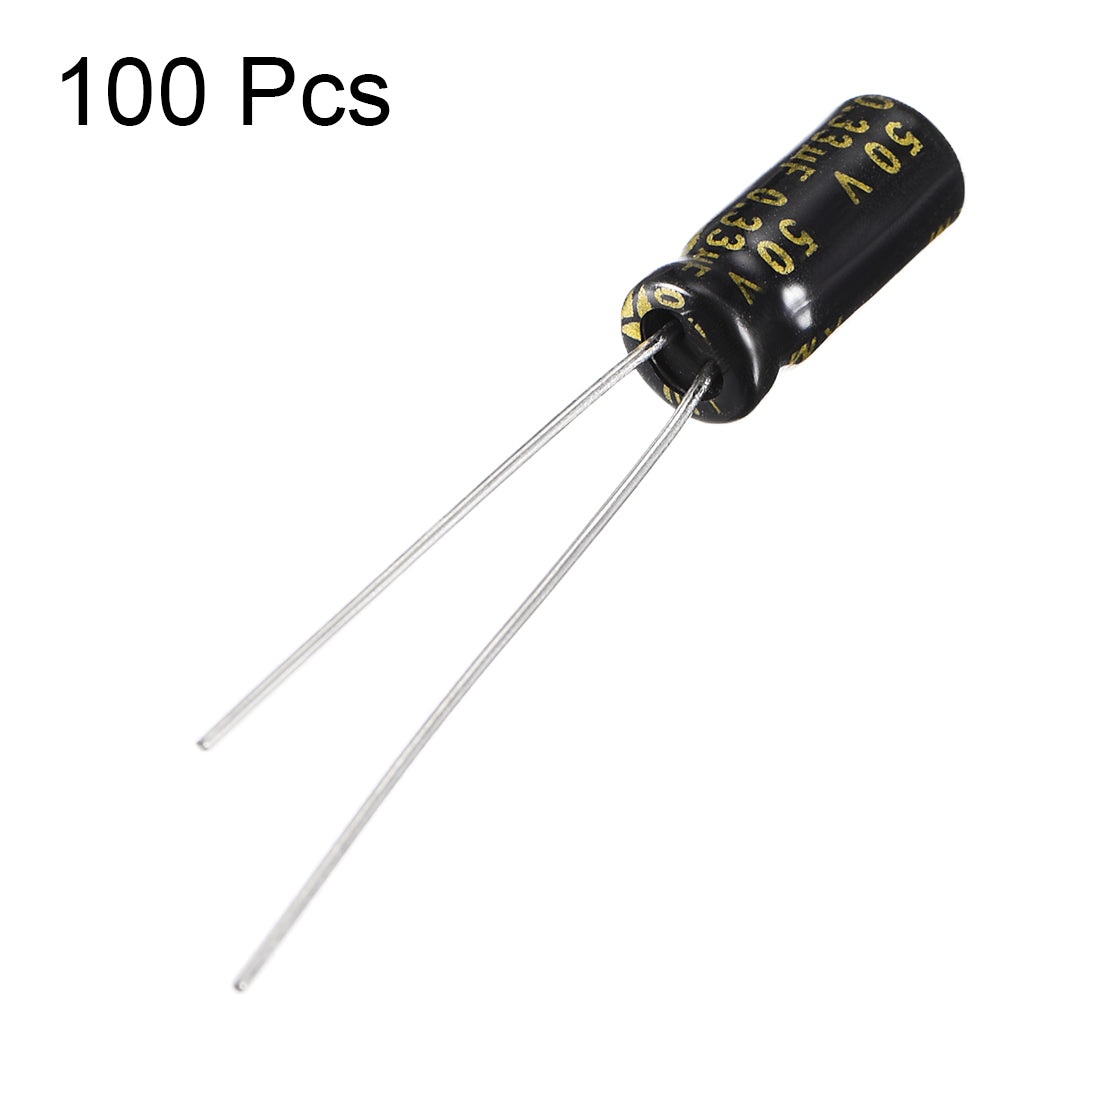 uxcell Uxcell Aluminum Radial Electrolytic Capacitor with 0.33uF 50V 105 Celsius Life 2000H 5 x 11 mm Black 100pcs